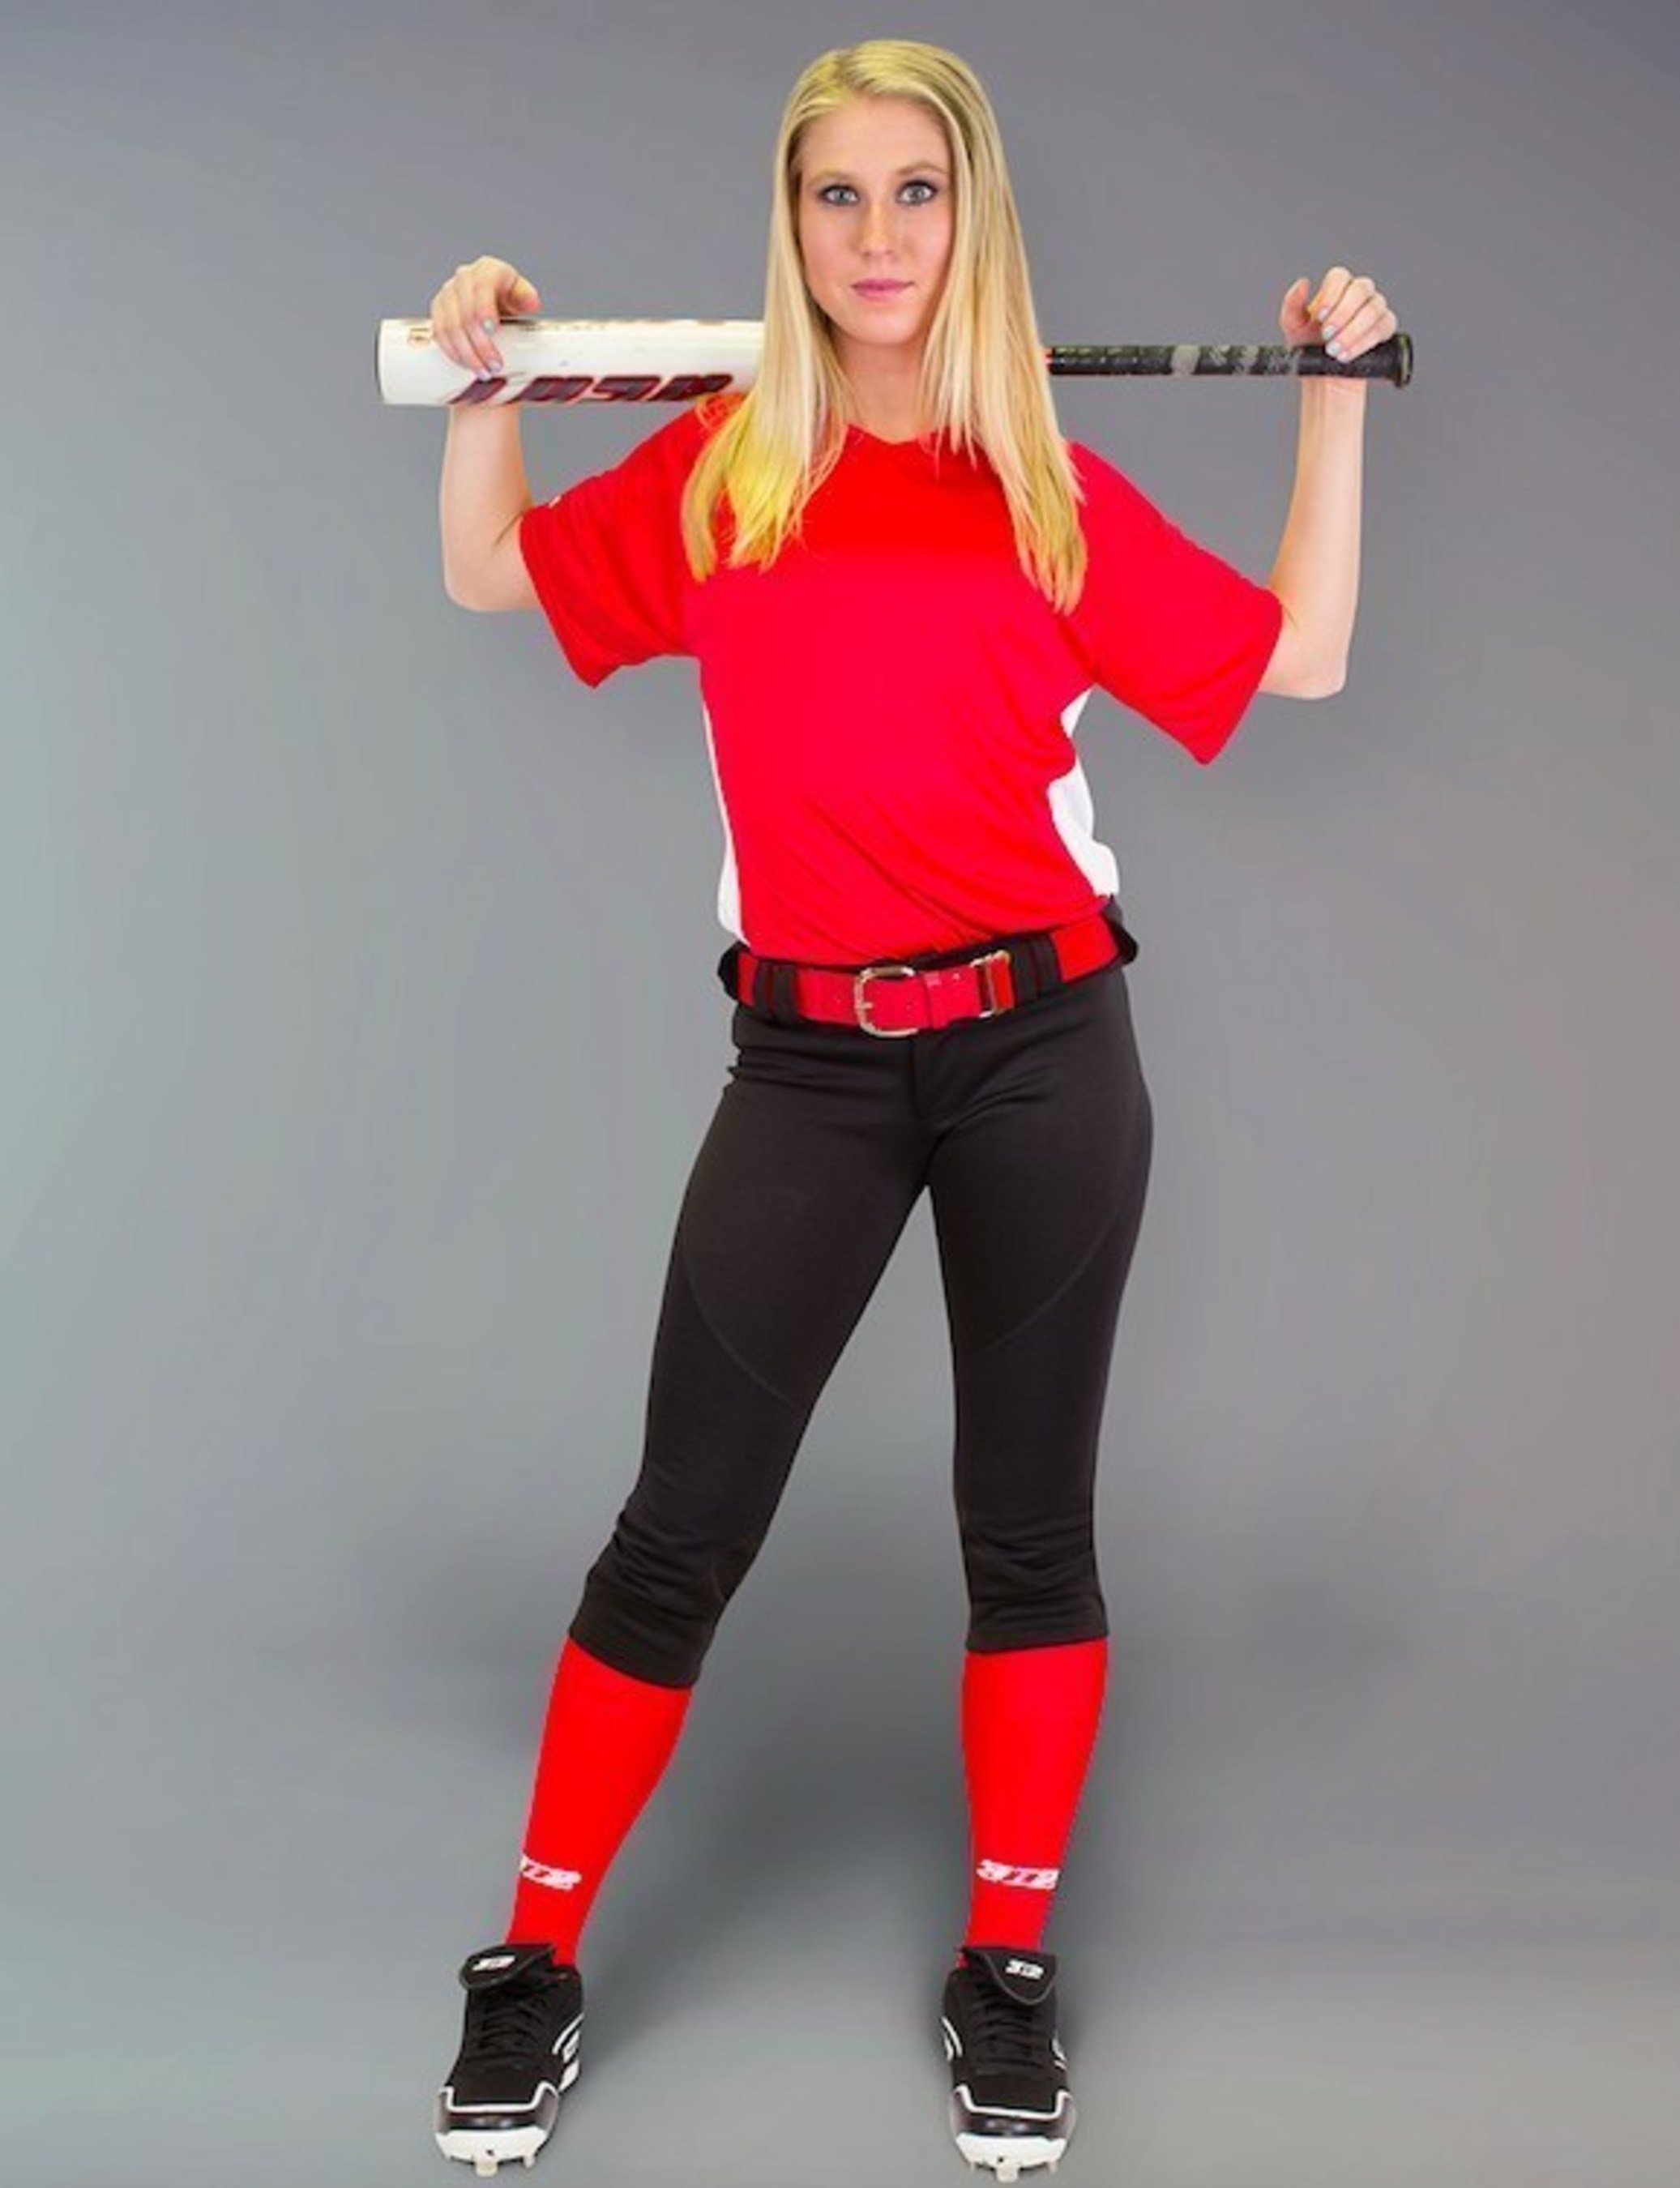 3N2 Unveils World's First Patented Fastpitch Softball Pants